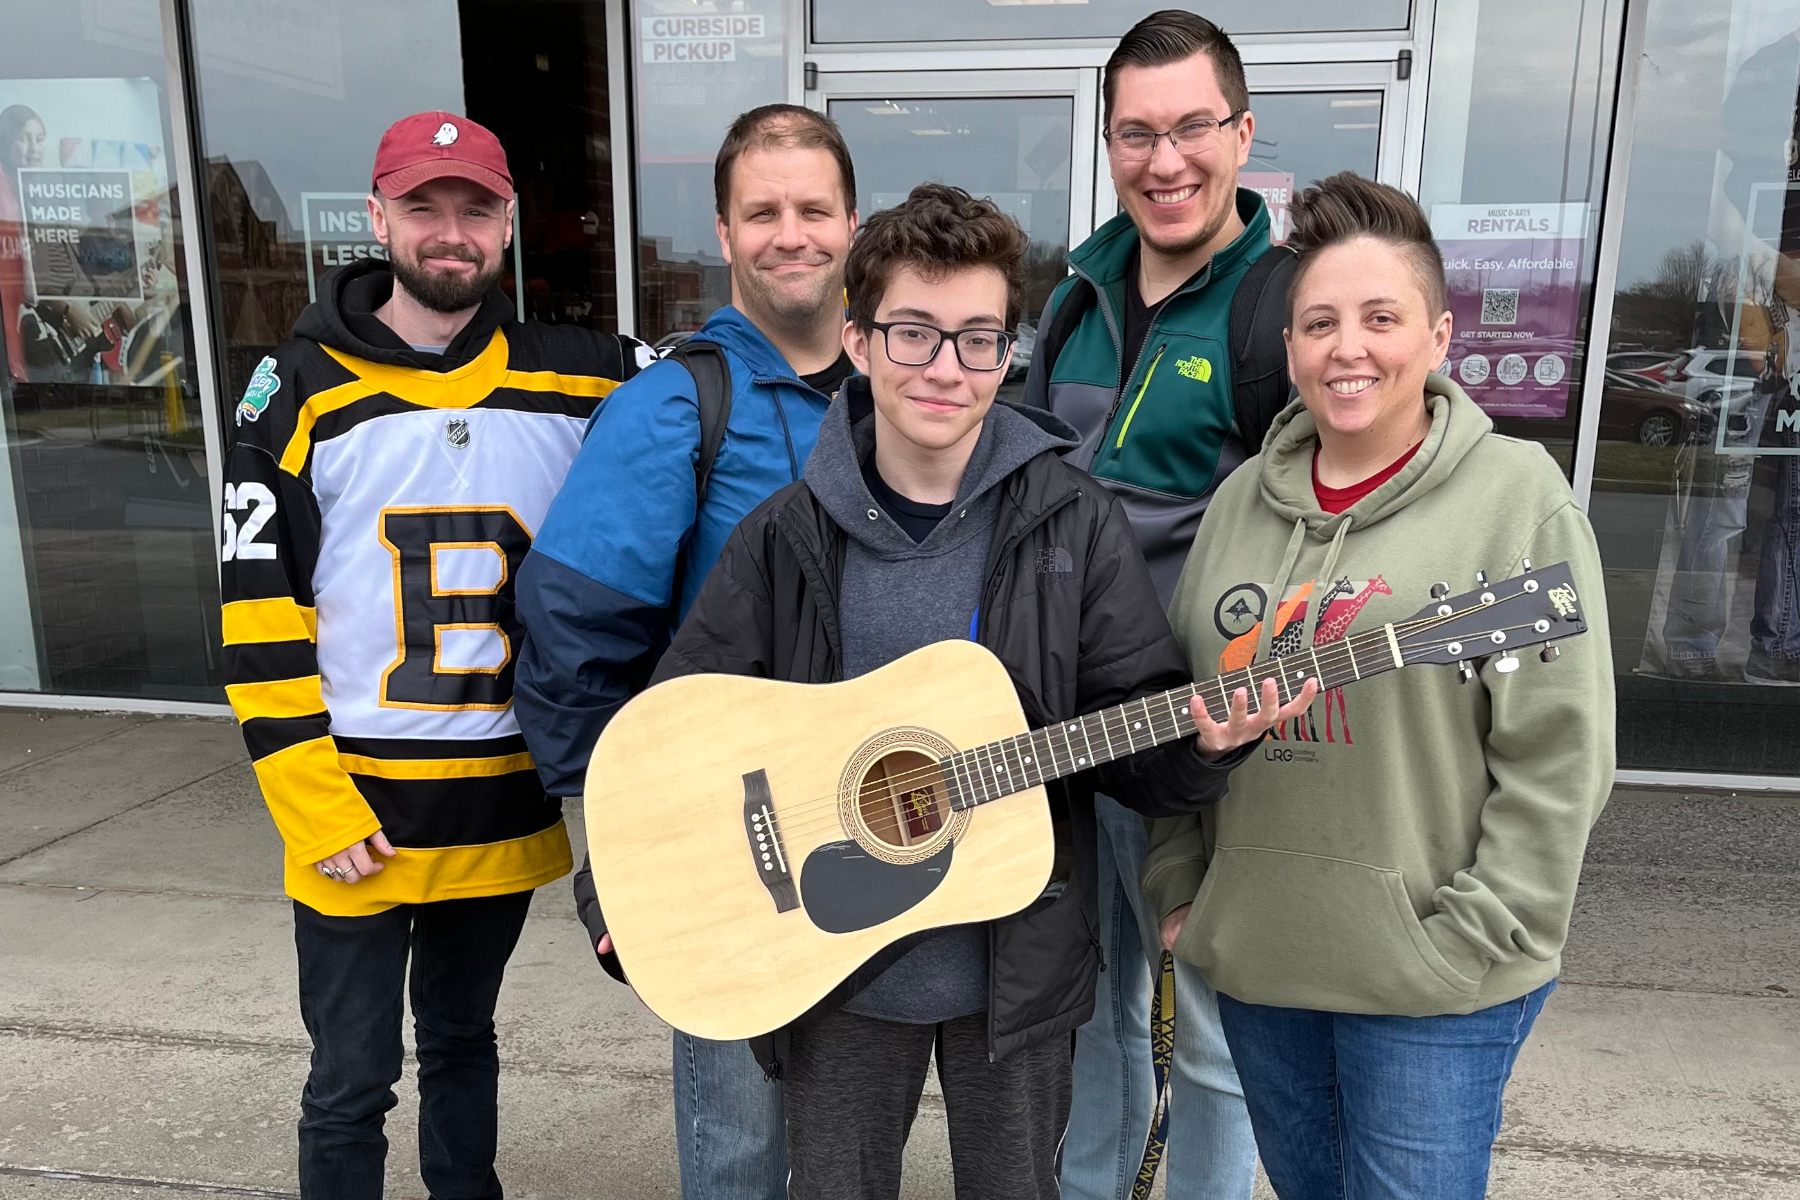 Students in front of music store, smiling, holding guitar